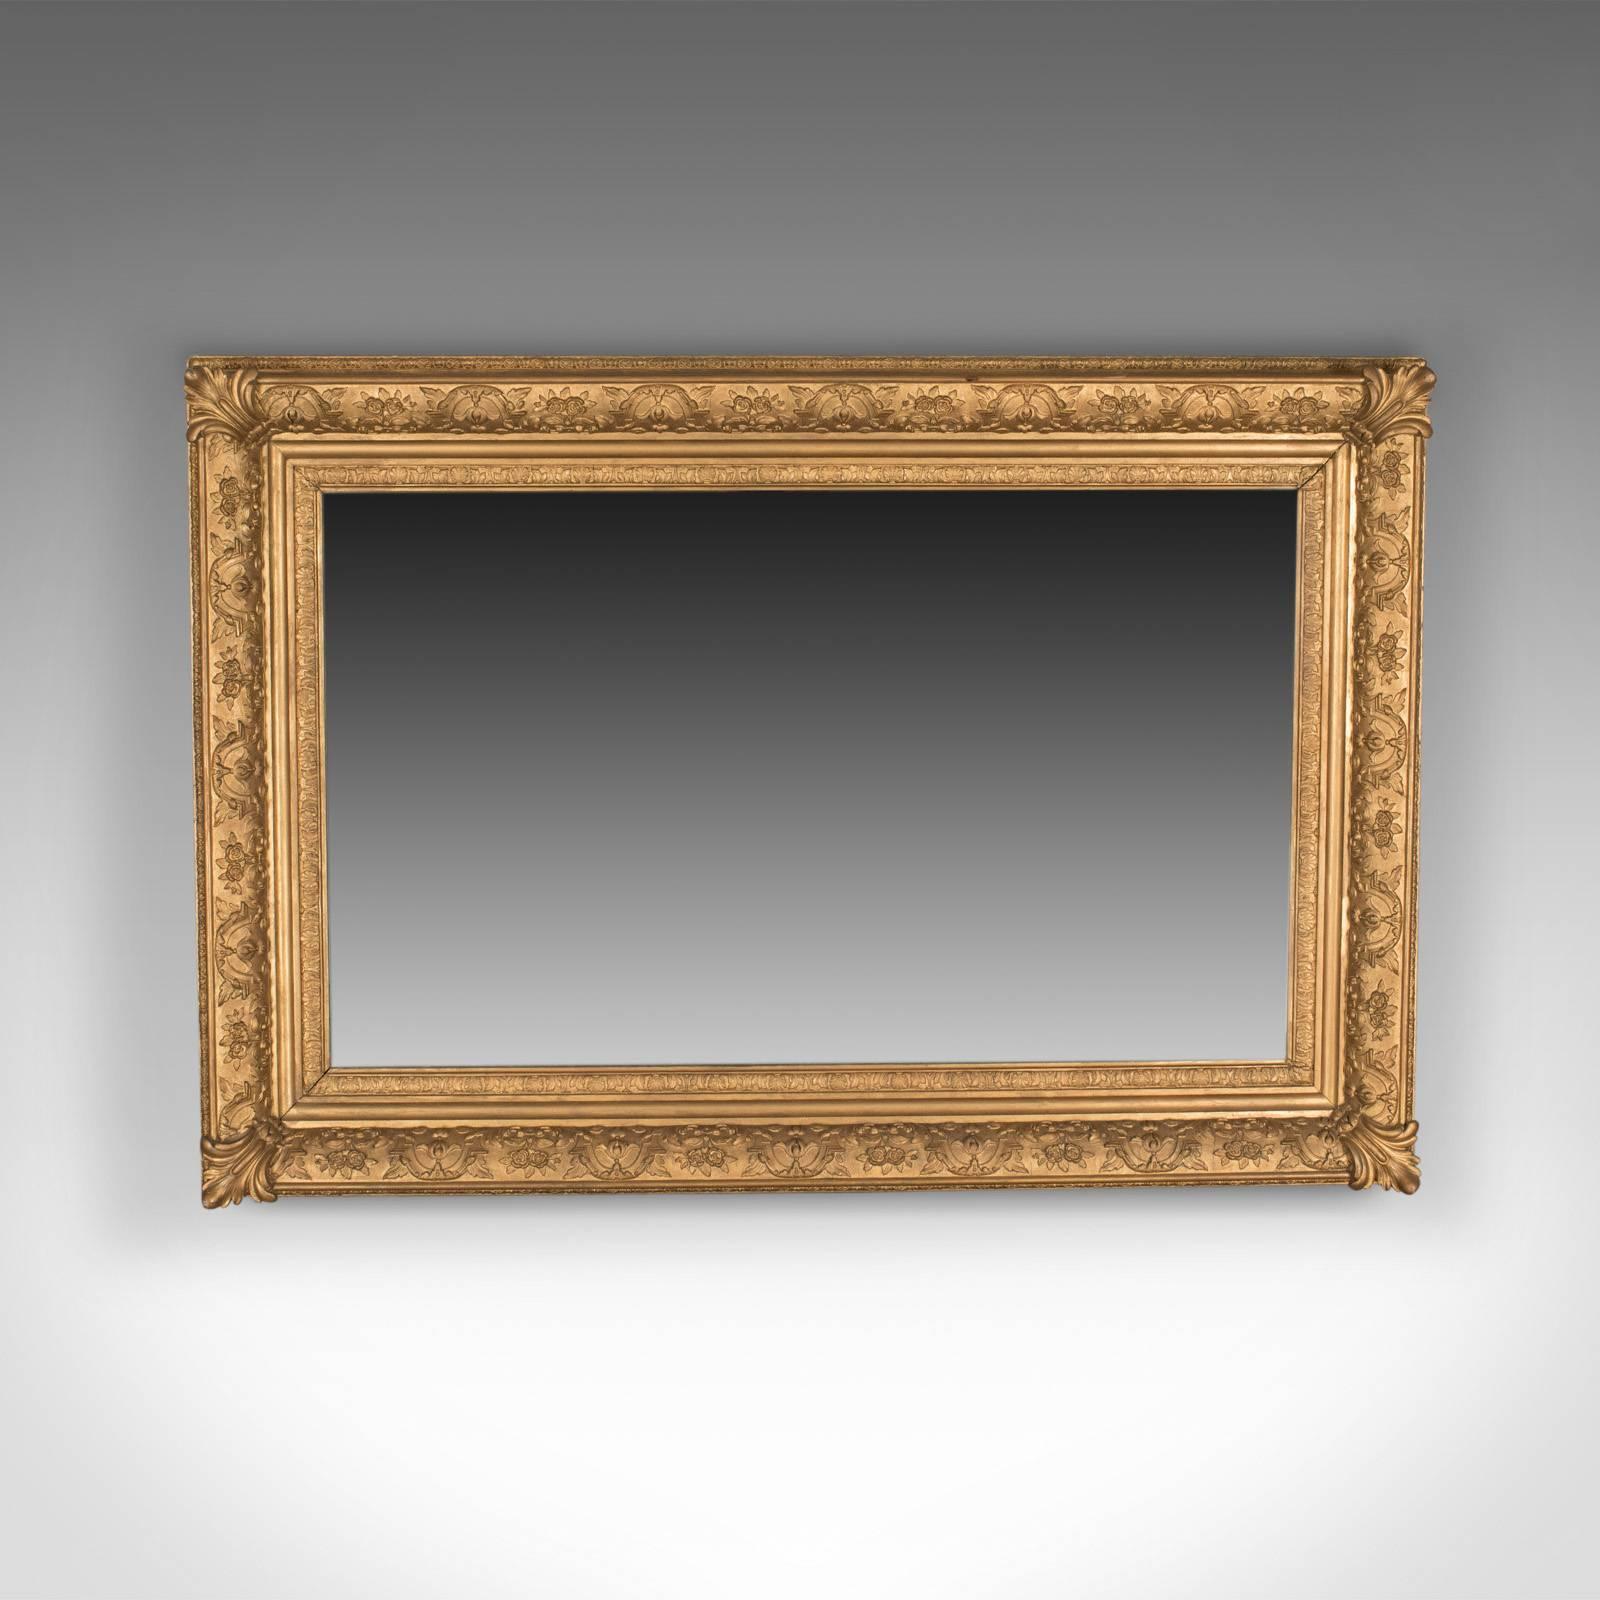 This is a large antique wall mirror, an English, Victorian gilt gesso frame, an overmantel dating to circa 1880.

A super period gilt gesso frame
Victorian in the classical taste
Decorated with floral and foliate detail
Later mirror plate in